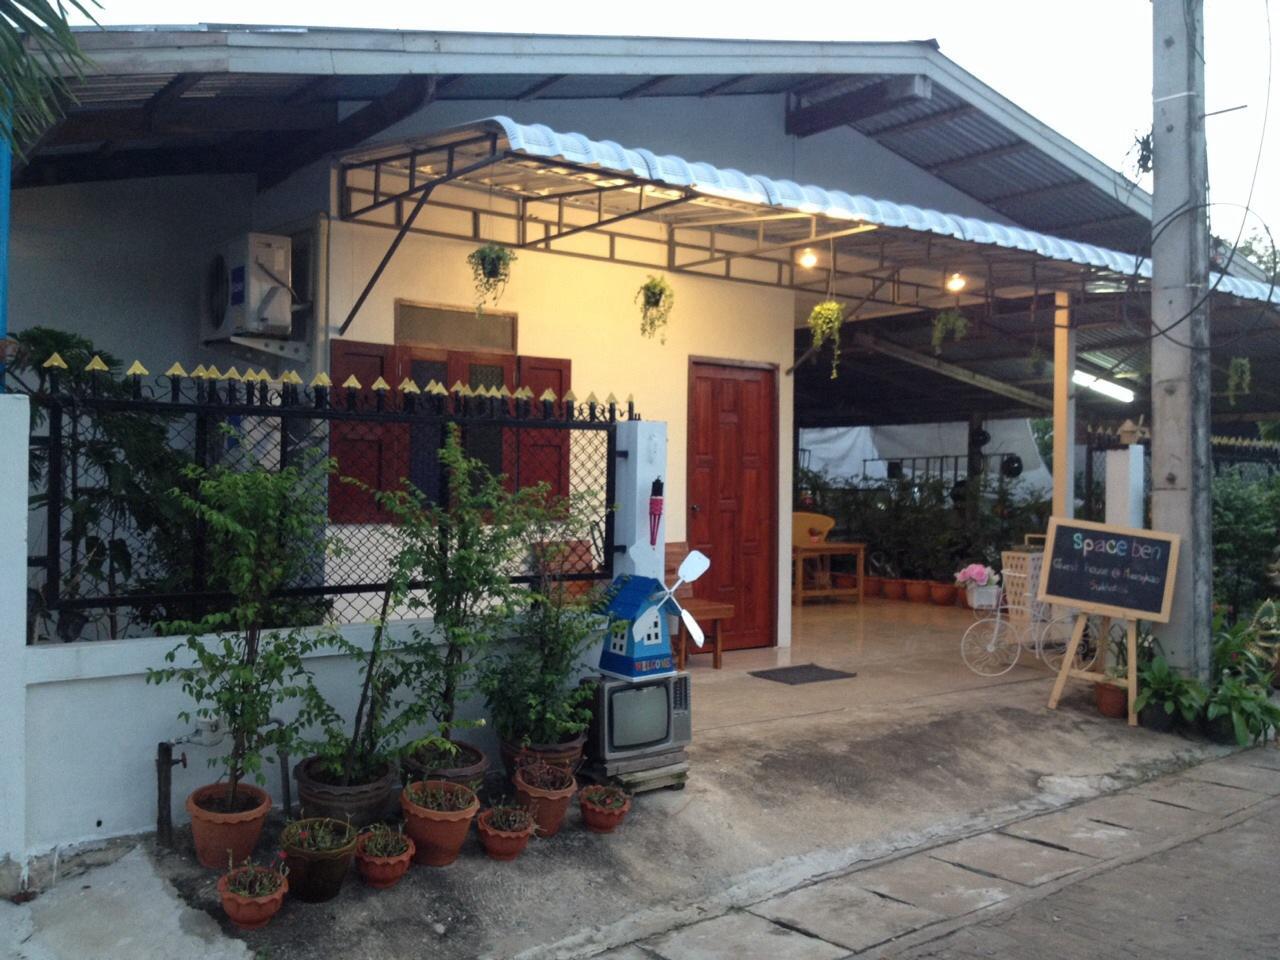 Space Ben Guesthouse @ Muangkao Booking,Space Ben Guesthouse @ Muangkao Resort,Space Ben Guesthouse @ Muangkao reservation,Space Ben Guesthouse @ Muangkao deals,Space Ben Guesthouse @ Muangkao Phone Number,Space Ben Guesthouse @ Muangkao website,Space Ben Guesthouse @ Muangkao E-mail,Space Ben Guesthouse @ Muangkao address,Space Ben Guesthouse @ Muangkao Overview,Rooms & Rates,Space Ben Guesthouse @ Muangkao Photos,Space Ben Guesthouse @ Muangkao Location Amenities,Space Ben Guesthouse @ Muangkao Q&A,Space Ben Guesthouse @ Muangkao Map,Space Ben Guesthouse @ Muangkao Gallery,Space Ben Guesthouse @ Muangkao Thailand 2016, Thailand Space Ben Guesthouse @ Muangkao room types 2016, Thailand Space Ben Guesthouse @ Muangkao price 2016, Space Ben Guesthouse @ Muangkao in Thailand 2016, Thailand Space Ben Guesthouse @ Muangkao address, Space Ben Guesthouse @ Muangkao Thailand booking online, Thailand Space Ben Guesthouse @ Muangkao travel services, Thailand Space Ben Guesthouse @ Muangkao pick up services.